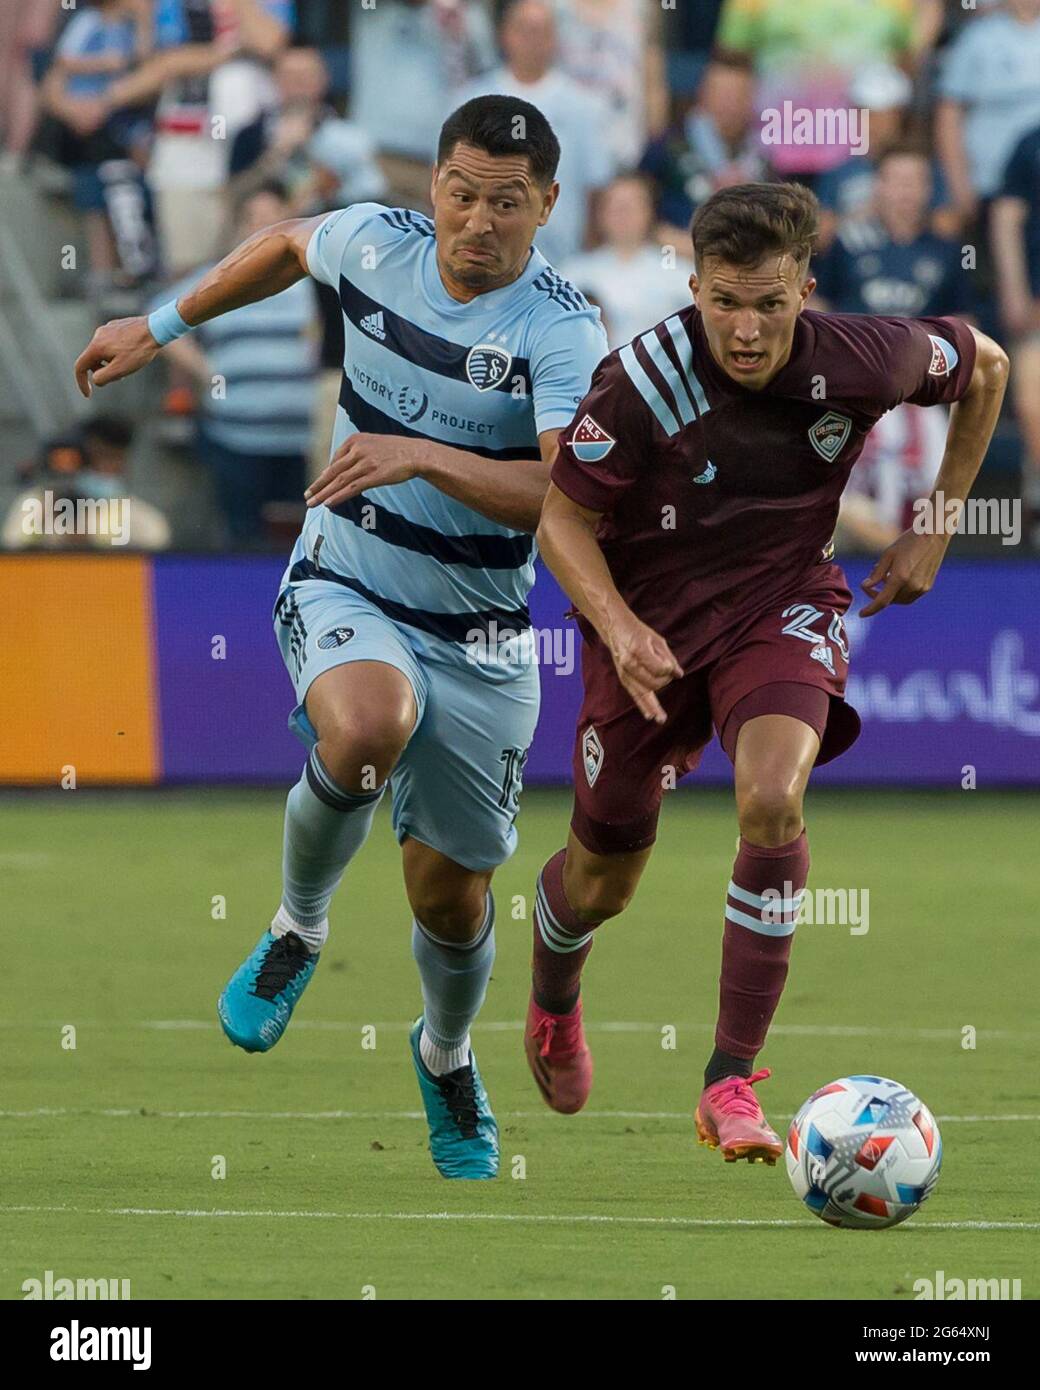 Kansas City, Kansas, USA. 23rd June, 2021. Colorado Rapids midfielder Cole Bassett #26 (r) and Sporting KC midfielder Roger Espinoza #15 (l) vie for field control at Sporting KC's defense during the first half of the game. Credit: Serena S.Y. Hsu/ZUMA Wire/Alamy Live News Stock Photo